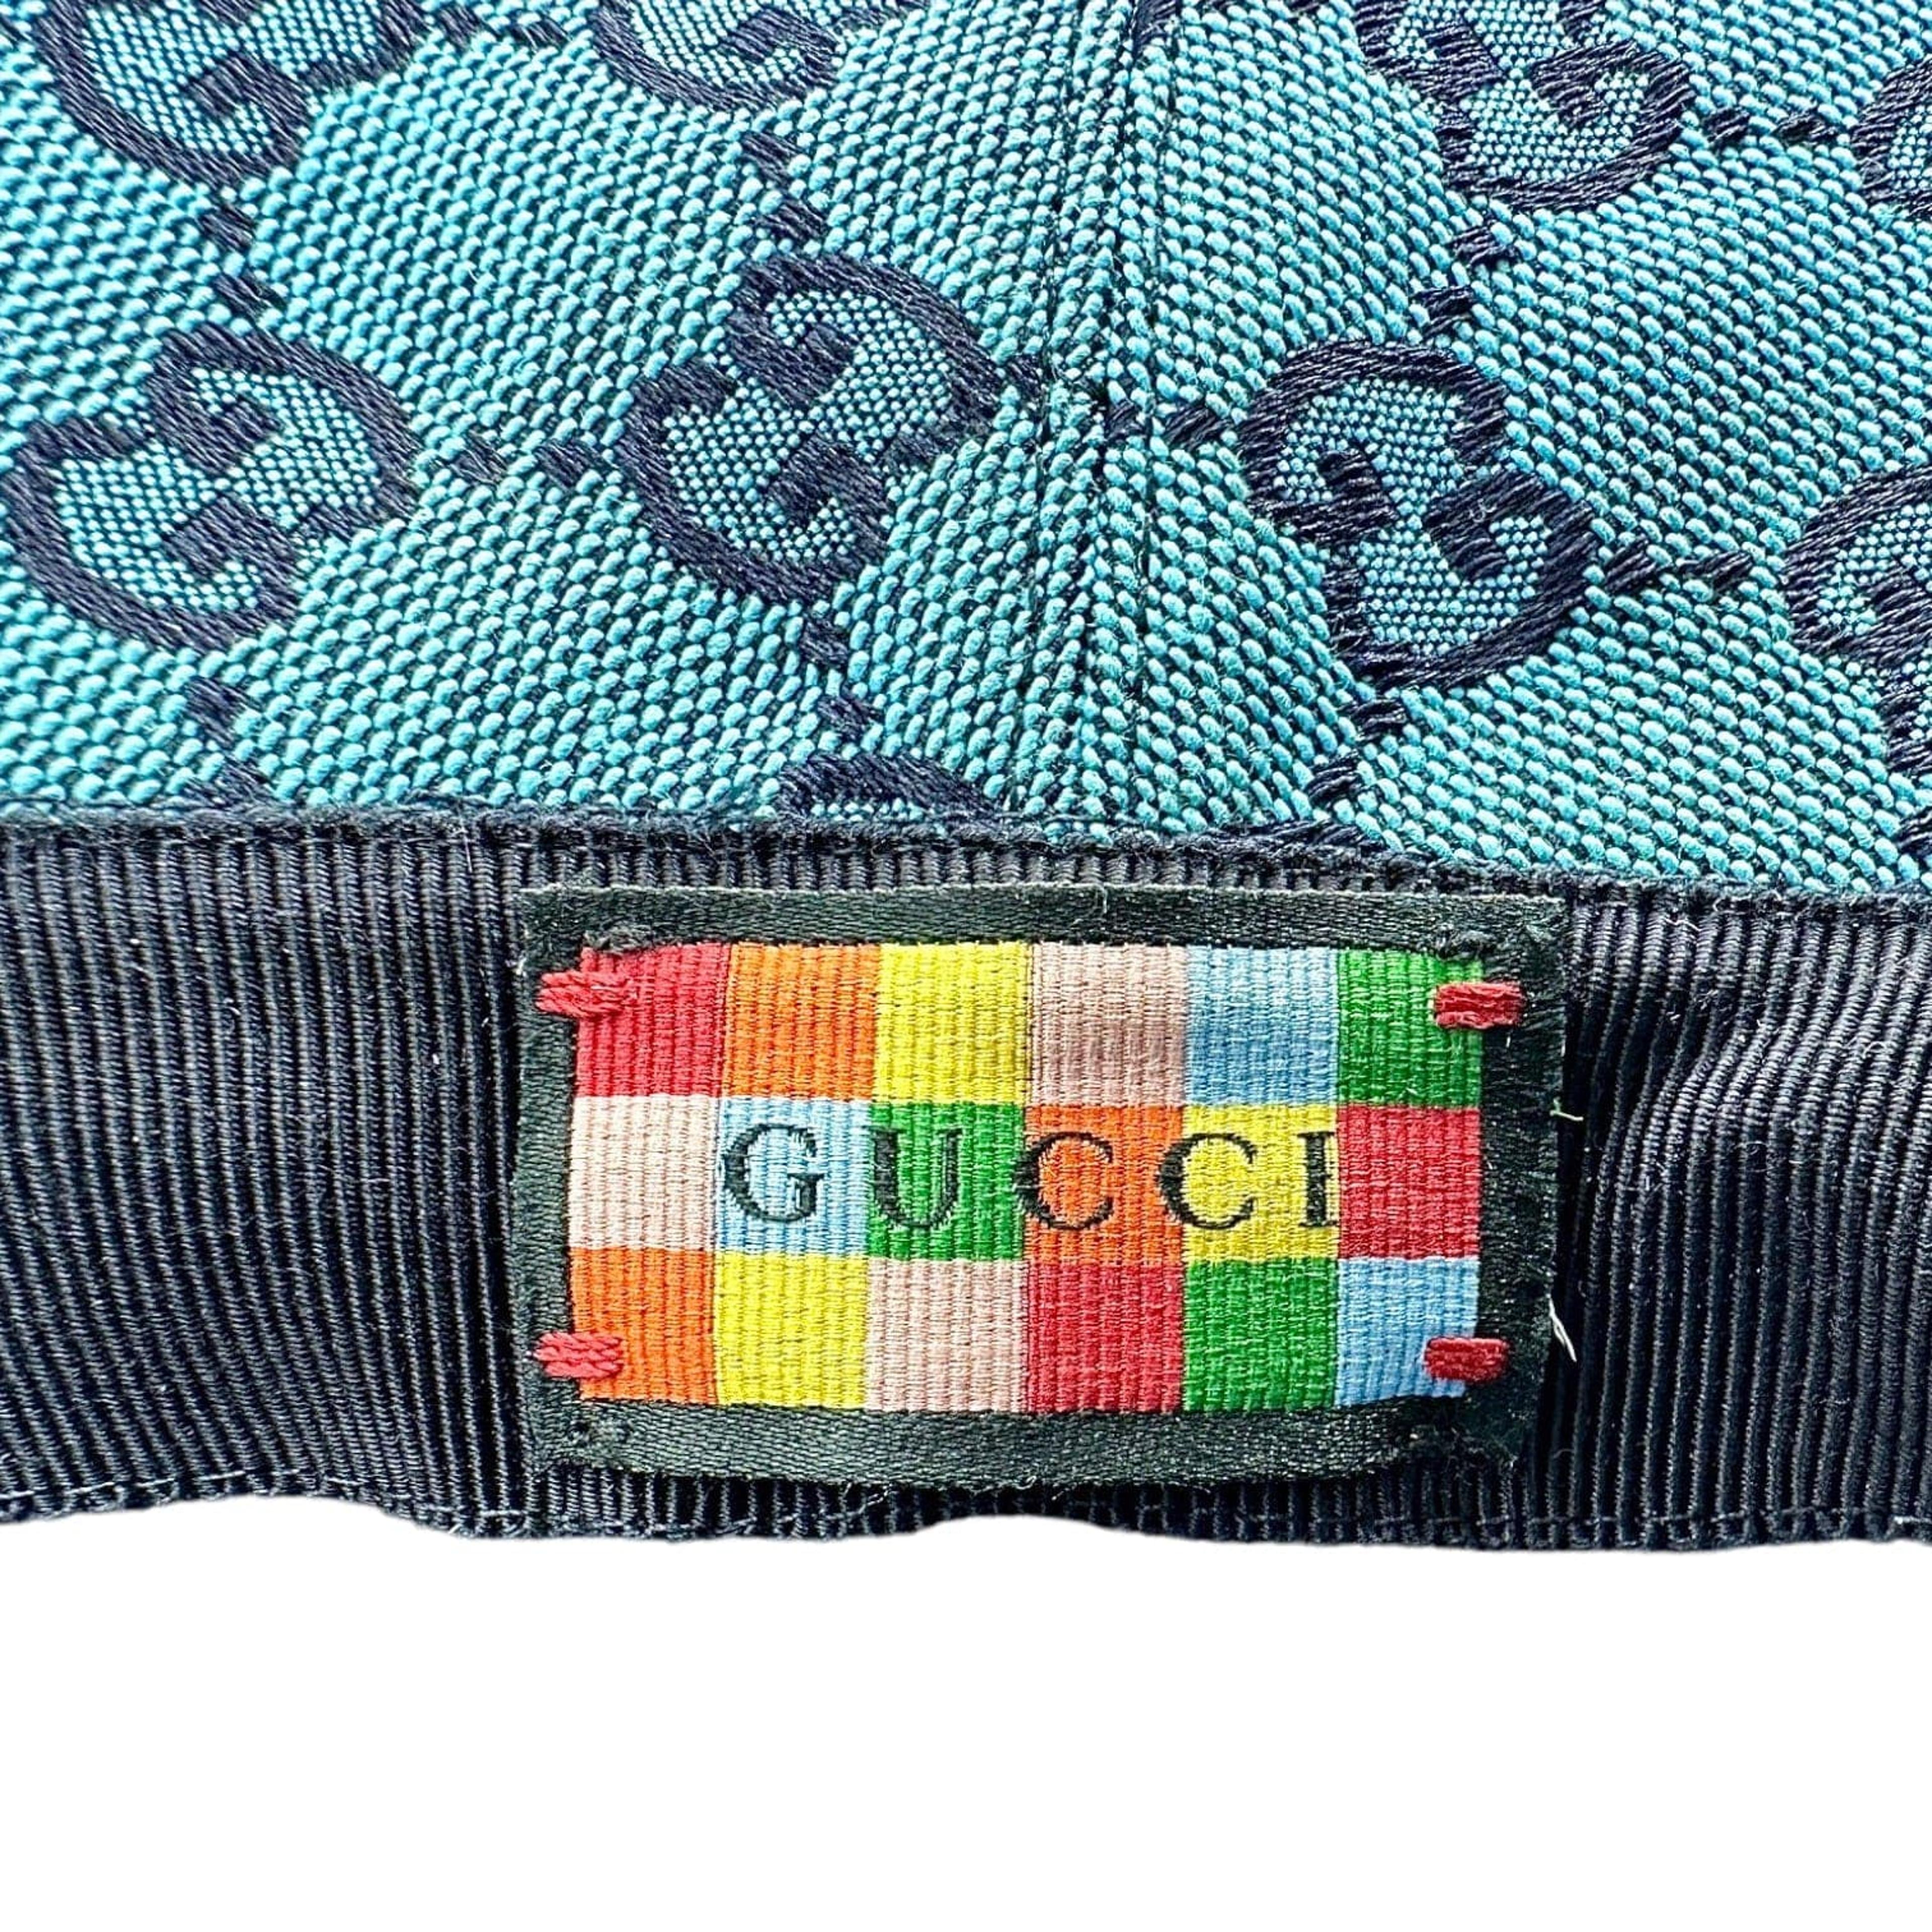 Alternate View 6 of Gucci GG Multicolor Canvas Bucket Hat Blue Black Pre-Owned